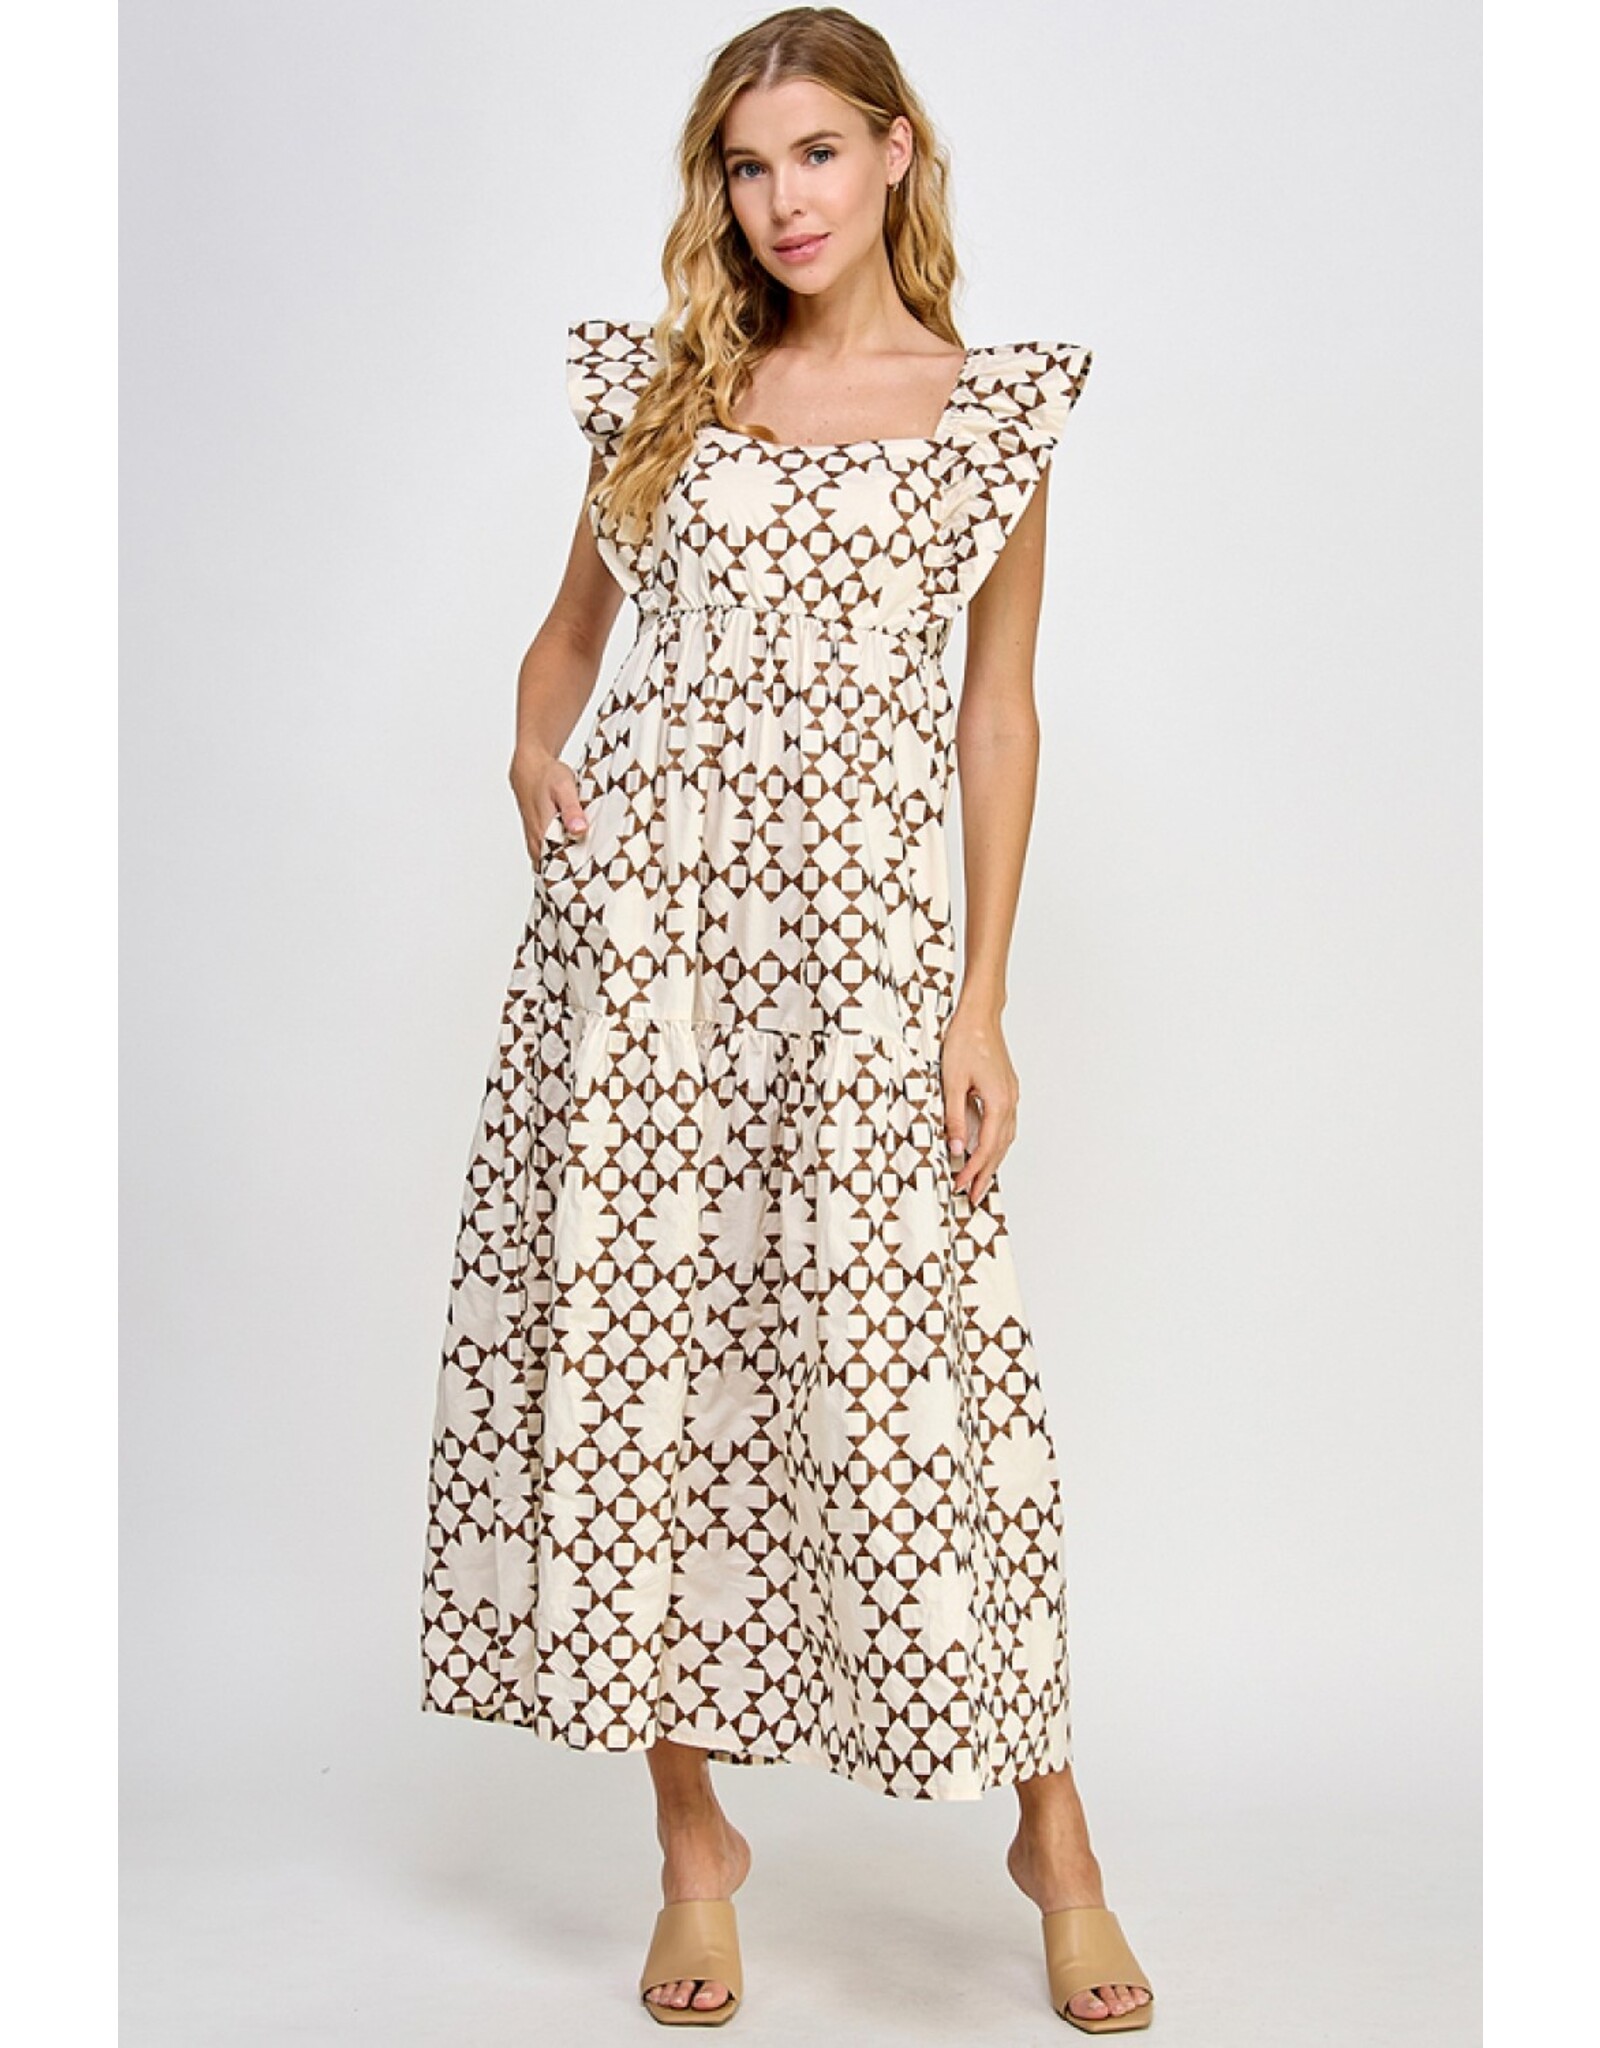 Bethany Embroidered Tiered Dress